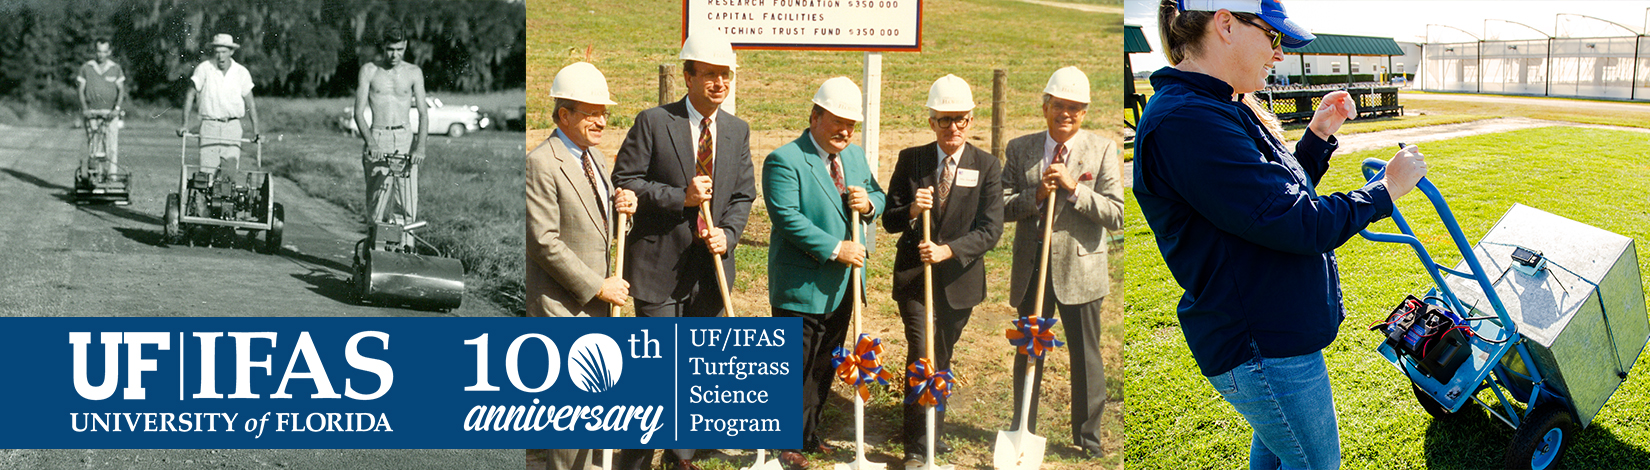 The UF/IFAS Turfgrass Science Program Celebrates 100 Years of Statewide Collaboration Between Teaching, Extension and Research